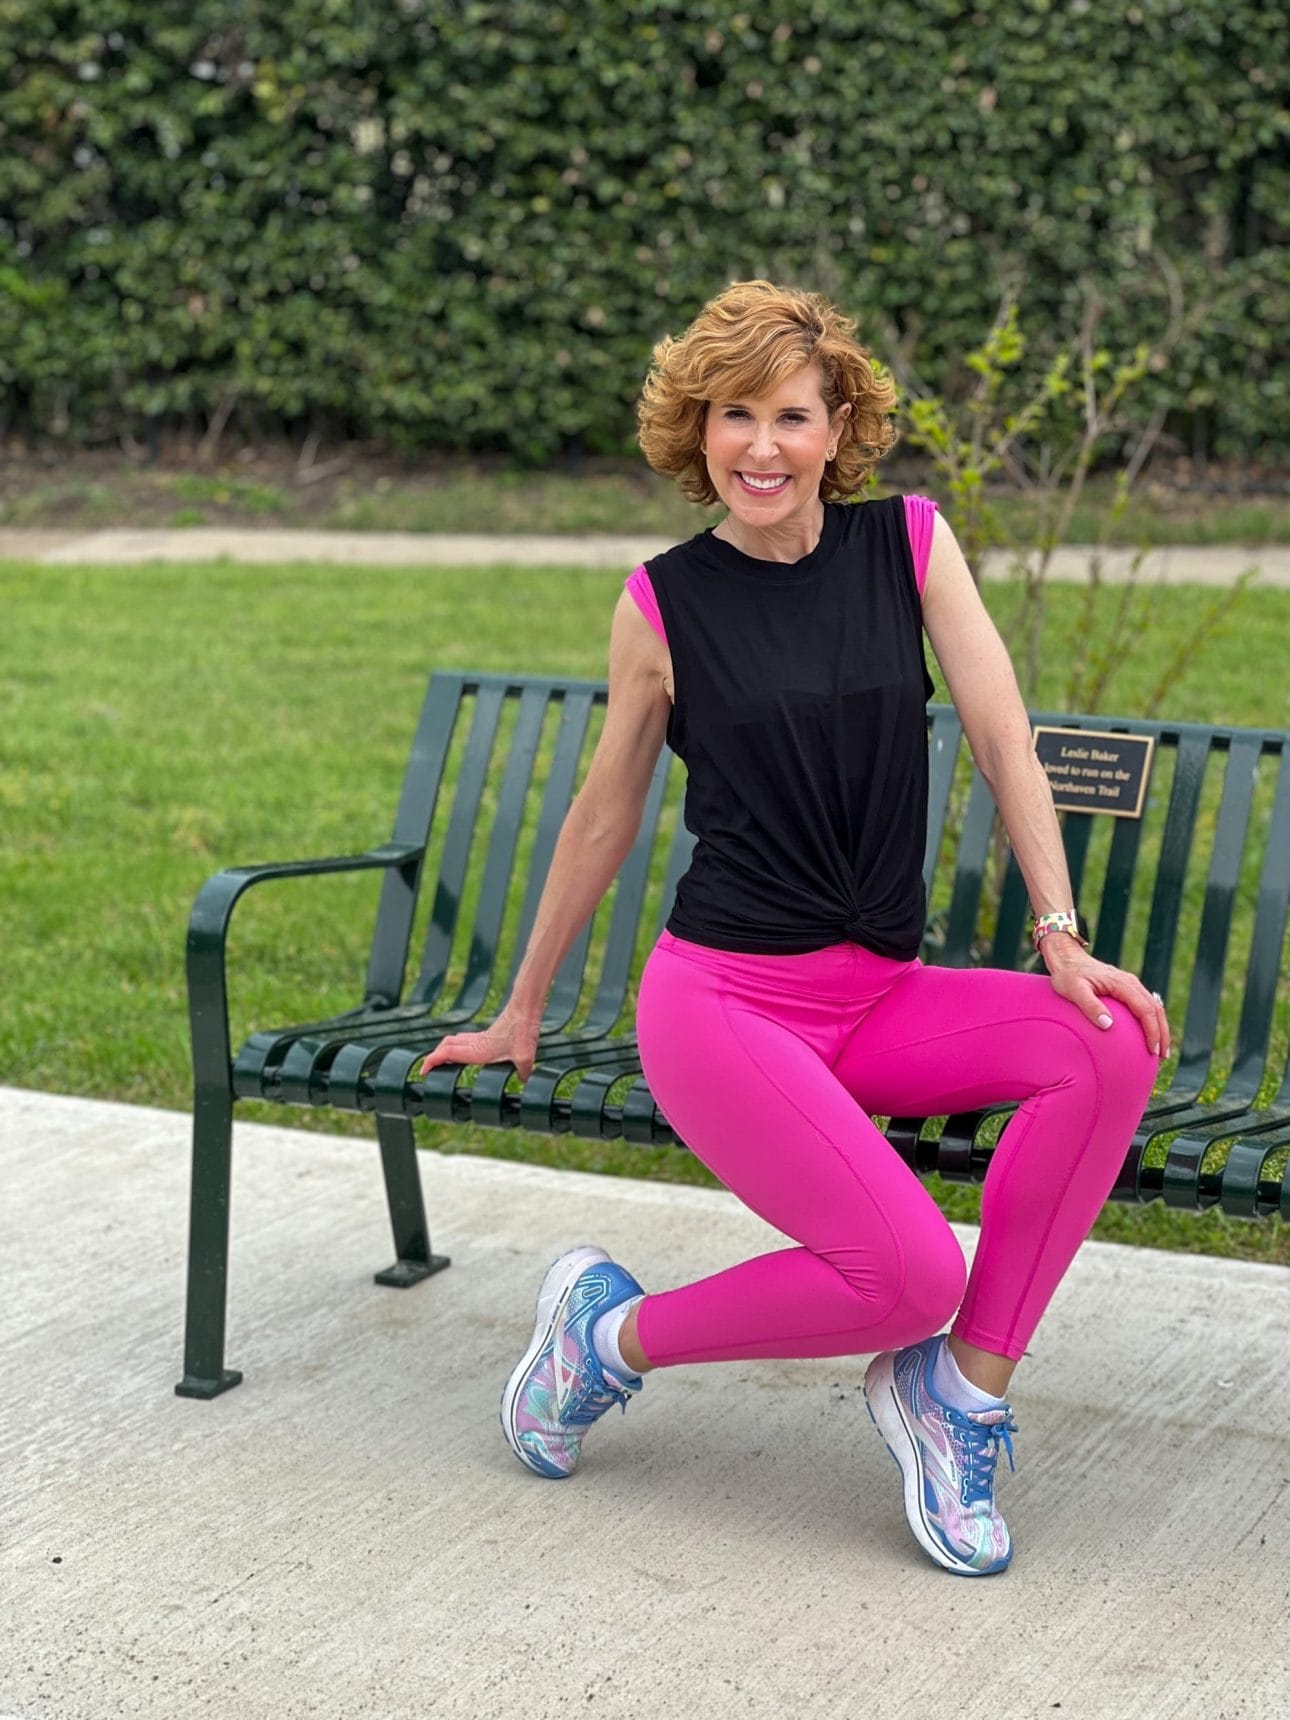 Walking For Health, Fitness & Weight Loss When You're Over 50